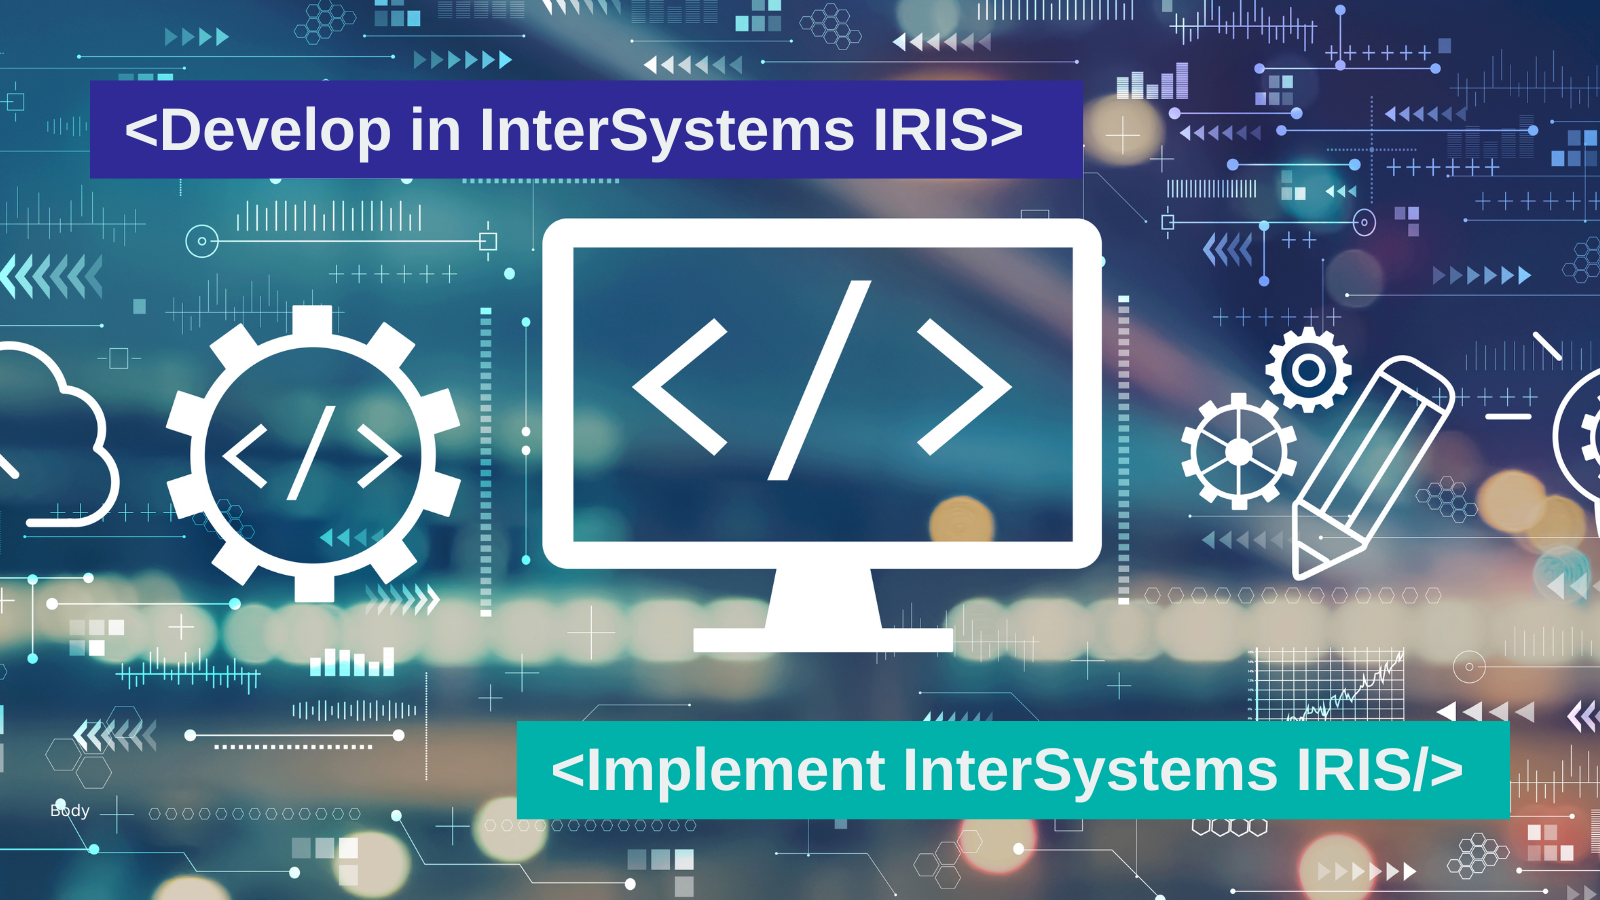 Develop in InterSystems IRIS, Implement InterSystems IRIS